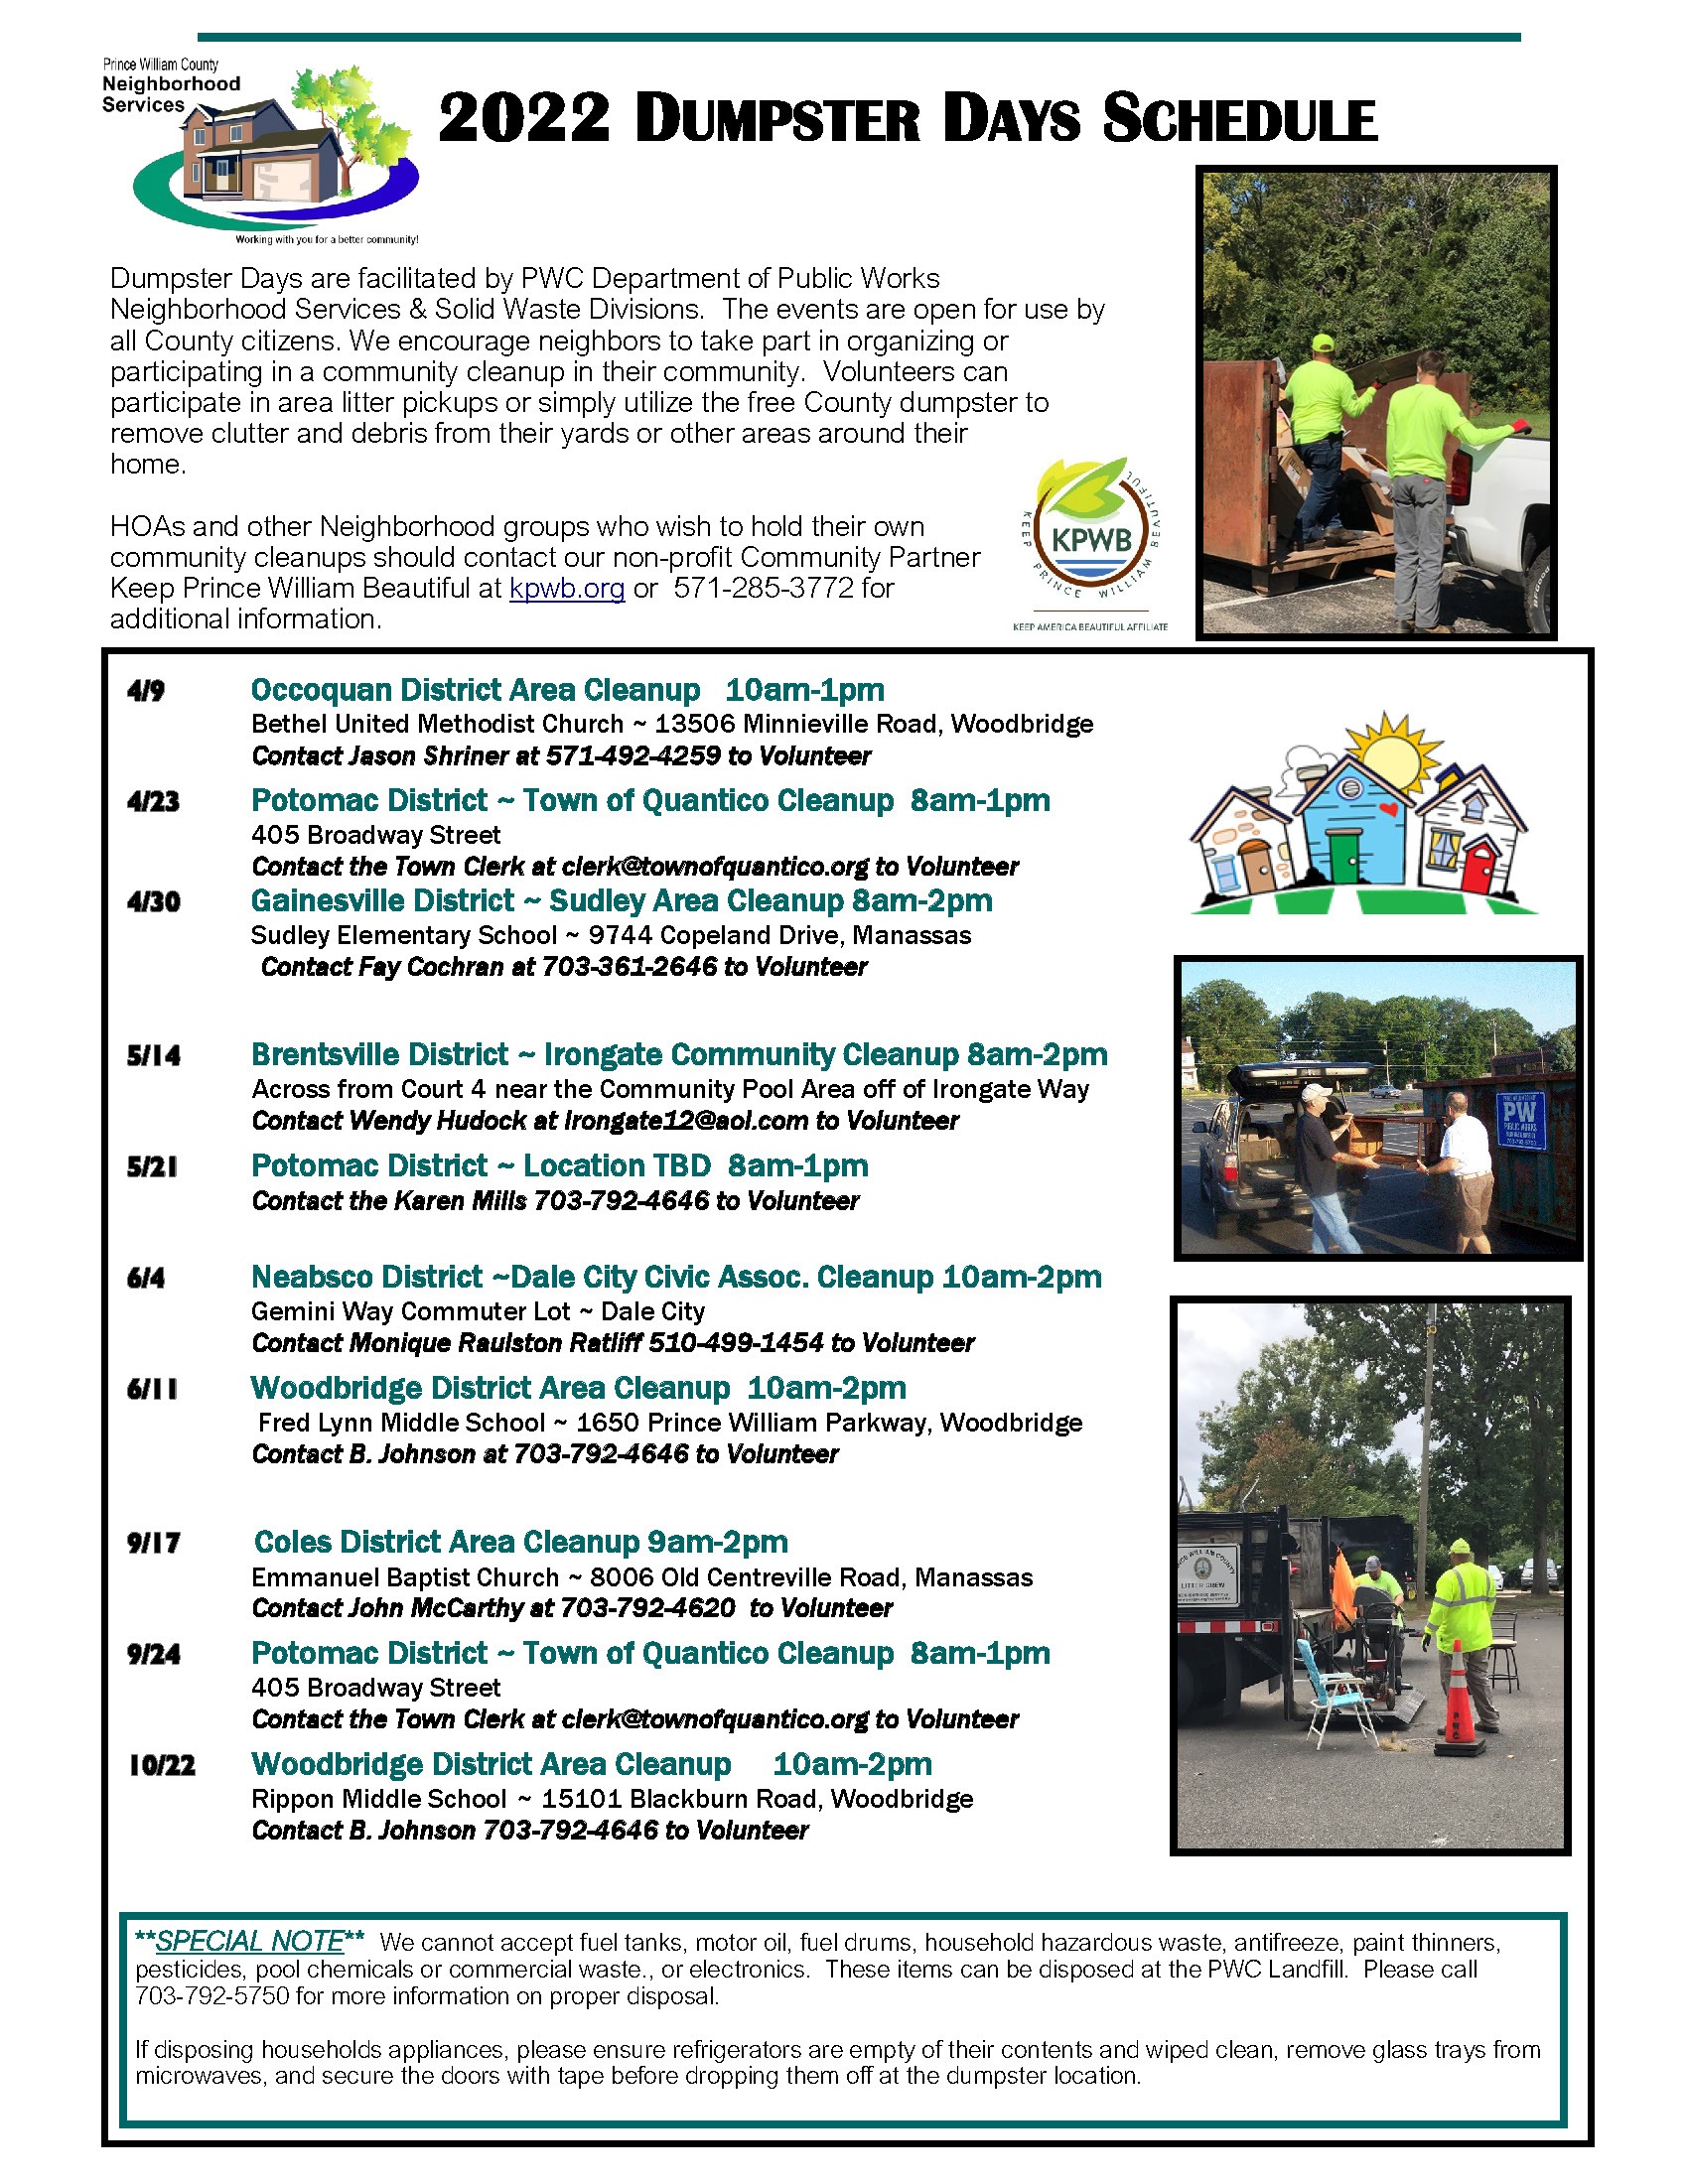 Dumpster Days Schedule 2022 FINAL - 2022 DUMPSTER DAYS: Neabsco District ~Dale City Civic Assoc. Cleanup